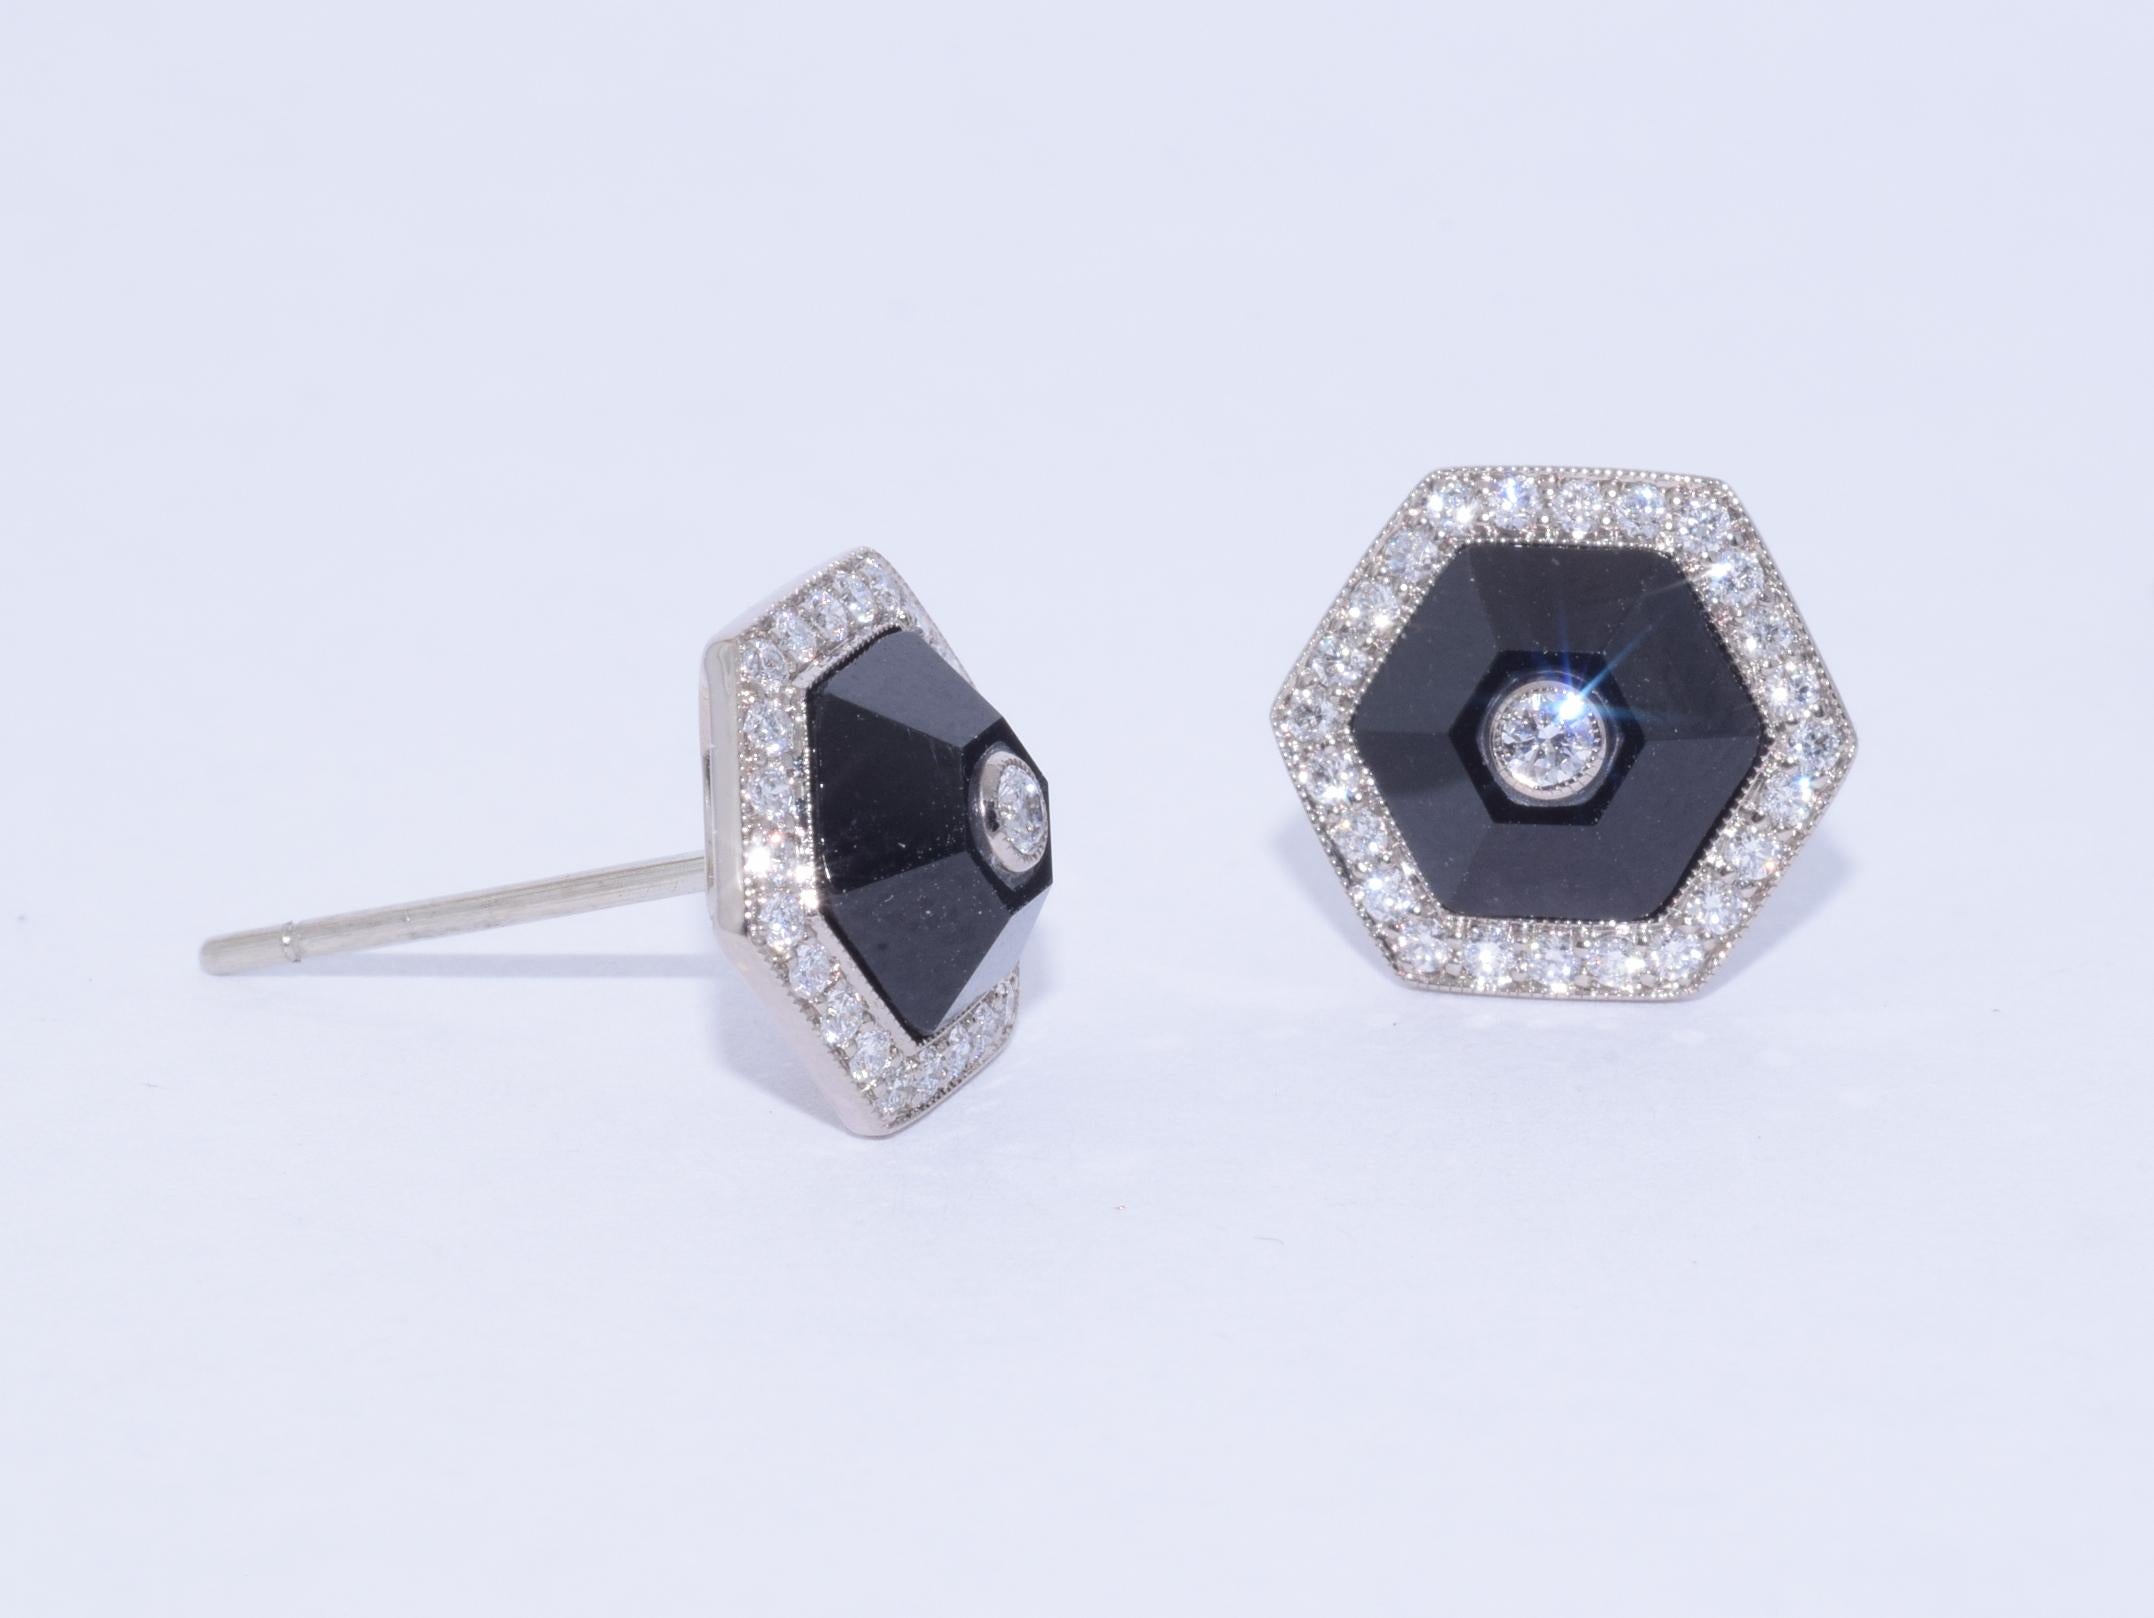 Faceted hexagons of black jade are bordered with round diamonds totaling approximately 0.35 carat mounted in 18 karat white gold.

Fred Leighton is renowned for extraordinary collections of vintage and contemporary jewelry. New signature creations